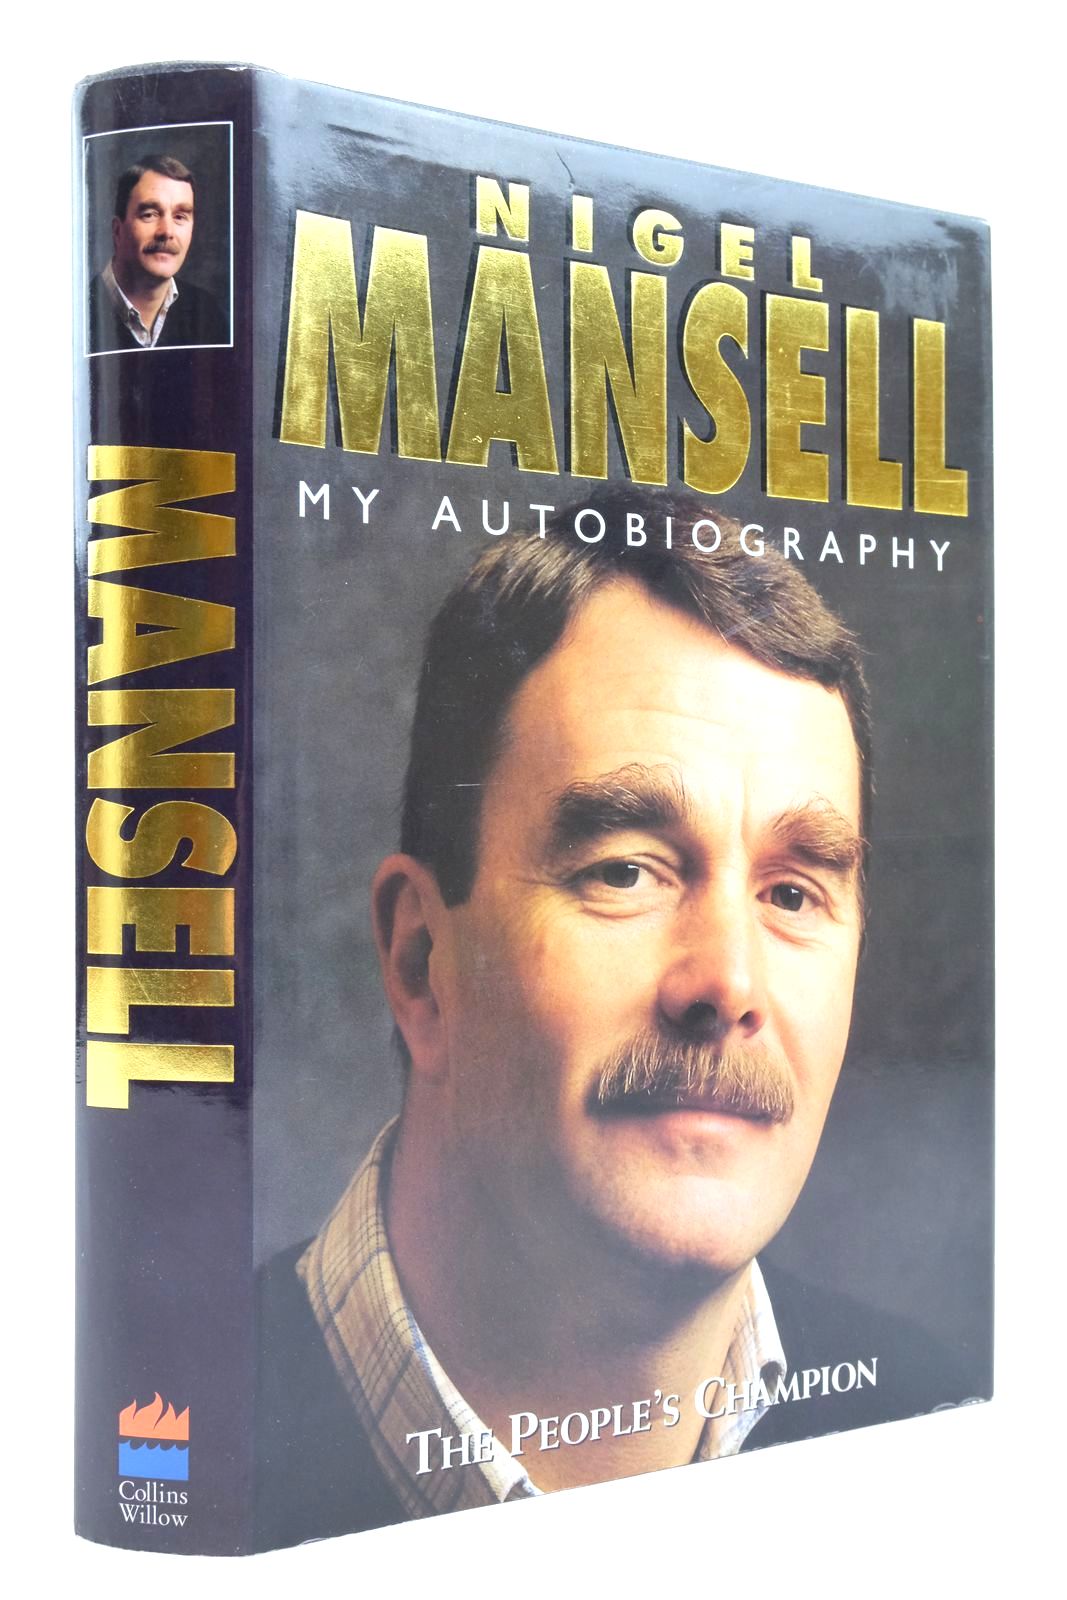 Photo of NIGEL MANSELL: MY AUTOBIOGRAPHY written by Mansell, Nigel Allen, James published by Collins Willow (STOCK CODE: 2137666)  for sale by Stella & Rose's Books